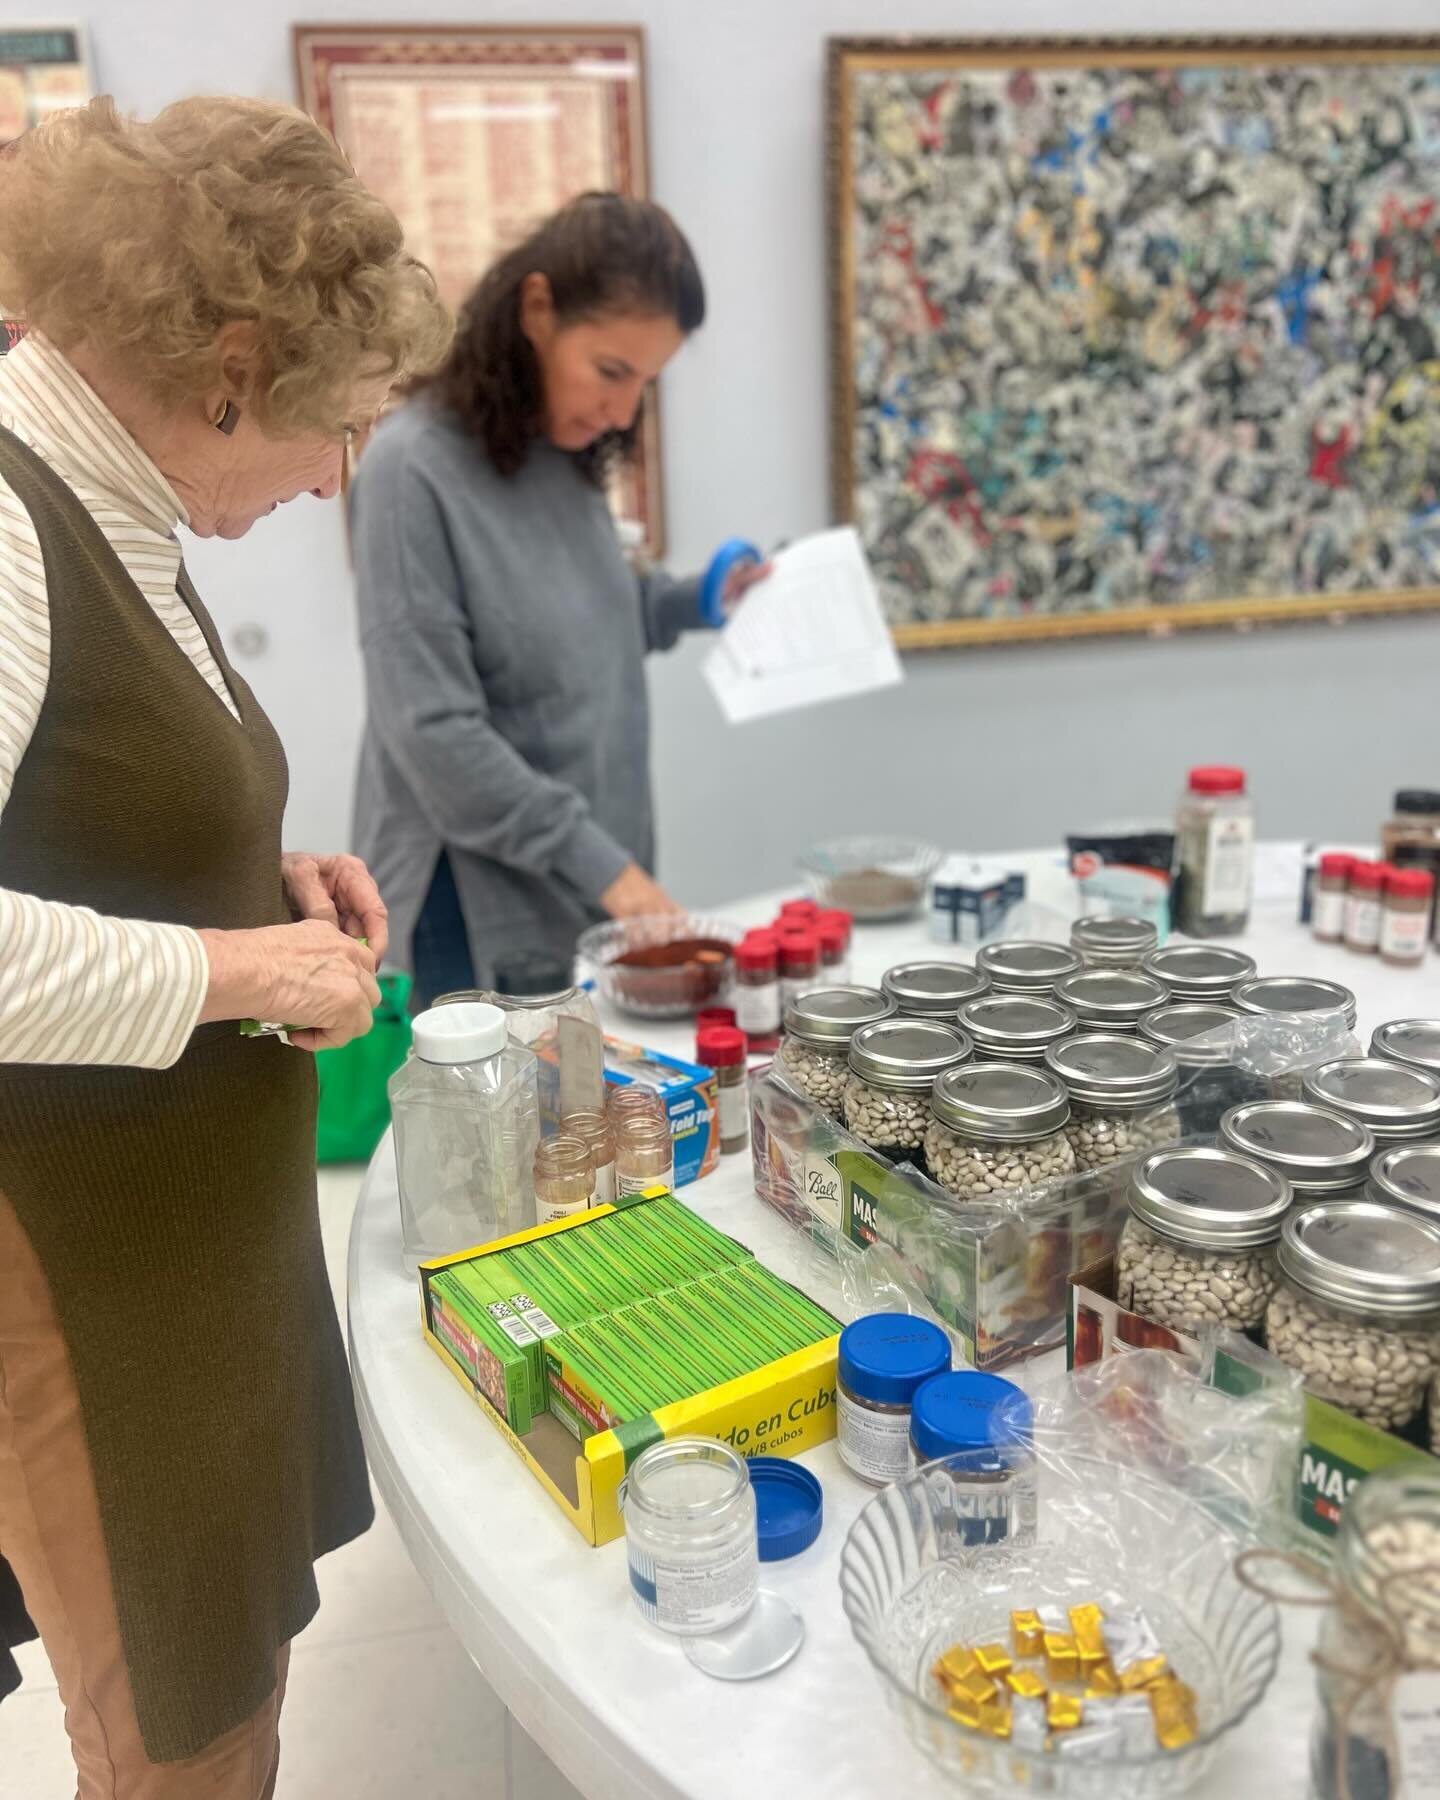 Thank you to all who contributed to our Day of Chesed event on Monday, January 15th! As a community we filled 61 boxes with supplies, soup, and art for refugee families newly arrived to Tucson.

Many thanks to:

Katie Stellitano, Kathy Gerst, Audrey 